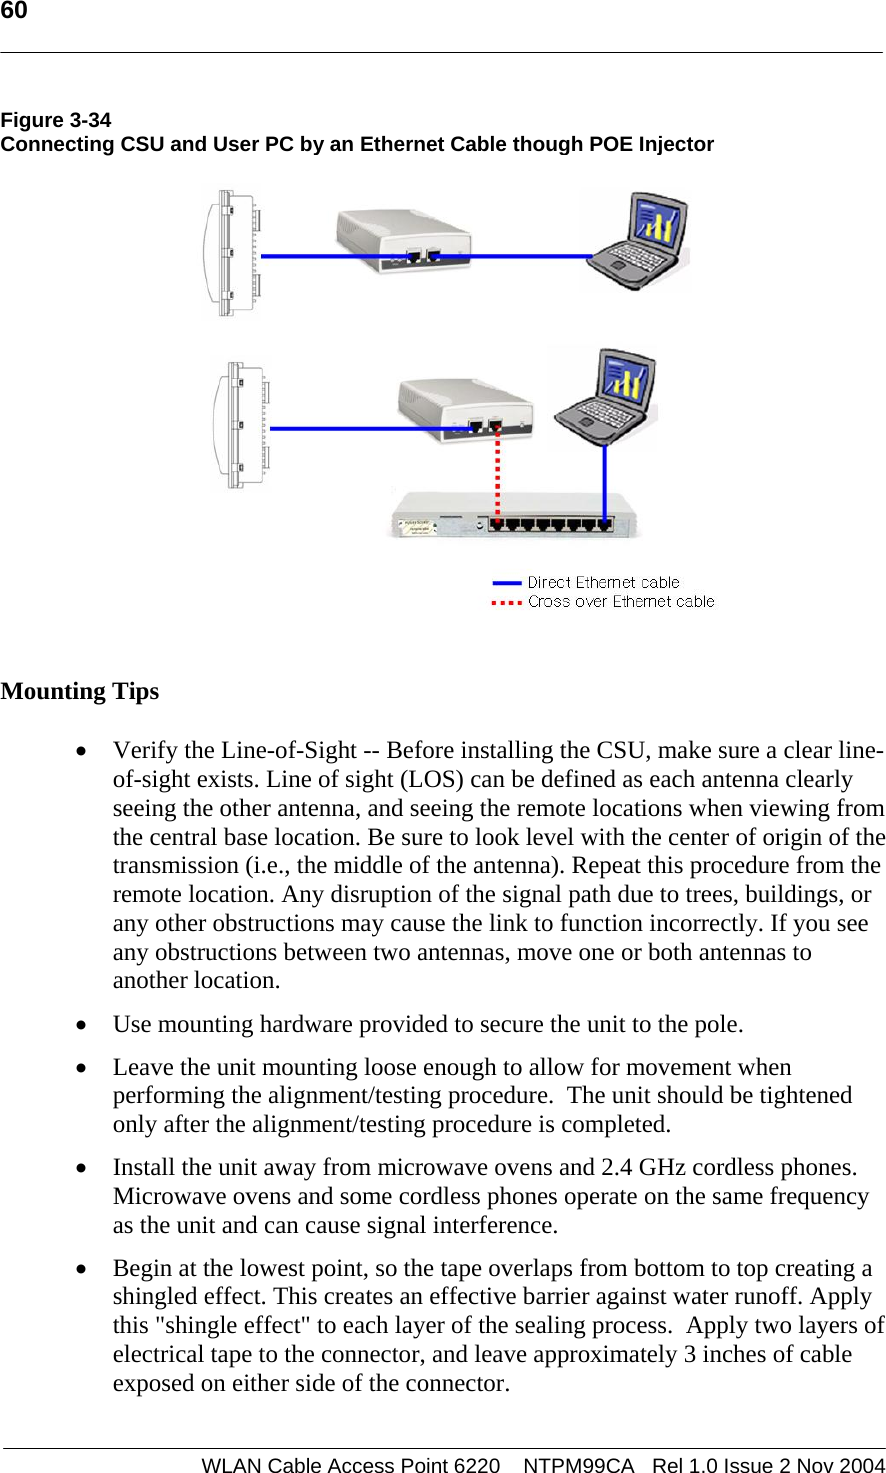   60    WLAN Cable Access Point 6220    NTPM99CA   Rel 1.0 Issue 2 Nov 2004 Figure 3-34 Connecting CSU and User PC by an Ethernet Cable though POE Injector    Mounting Tips  • Verify the Line-of-Sight -- Before installing the CSU, make sure a clear line-of-sight exists. Line of sight (LOS) can be defined as each antenna clearly seeing the other antenna, and seeing the remote locations when viewing from the central base location. Be sure to look level with the center of origin of the transmission (i.e., the middle of the antenna). Repeat this procedure from the remote location. Any disruption of the signal path due to trees, buildings, or any other obstructions may cause the link to function incorrectly. If you see any obstructions between two antennas, move one or both antennas to another location. • Use mounting hardware provided to secure the unit to the pole.   • Leave the unit mounting loose enough to allow for movement when performing the alignment/testing procedure.  The unit should be tightened only after the alignment/testing procedure is completed.  • Install the unit away from microwave ovens and 2.4 GHz cordless phones. Microwave ovens and some cordless phones operate on the same frequency as the unit and can cause signal interference. • Begin at the lowest point, so the tape overlaps from bottom to top creating a shingled effect. This creates an effective barrier against water runoff. Apply this &quot;shingle effect&quot; to each layer of the sealing process.  Apply two layers of electrical tape to the connector, and leave approximately 3 inches of cable exposed on either side of the connector.  